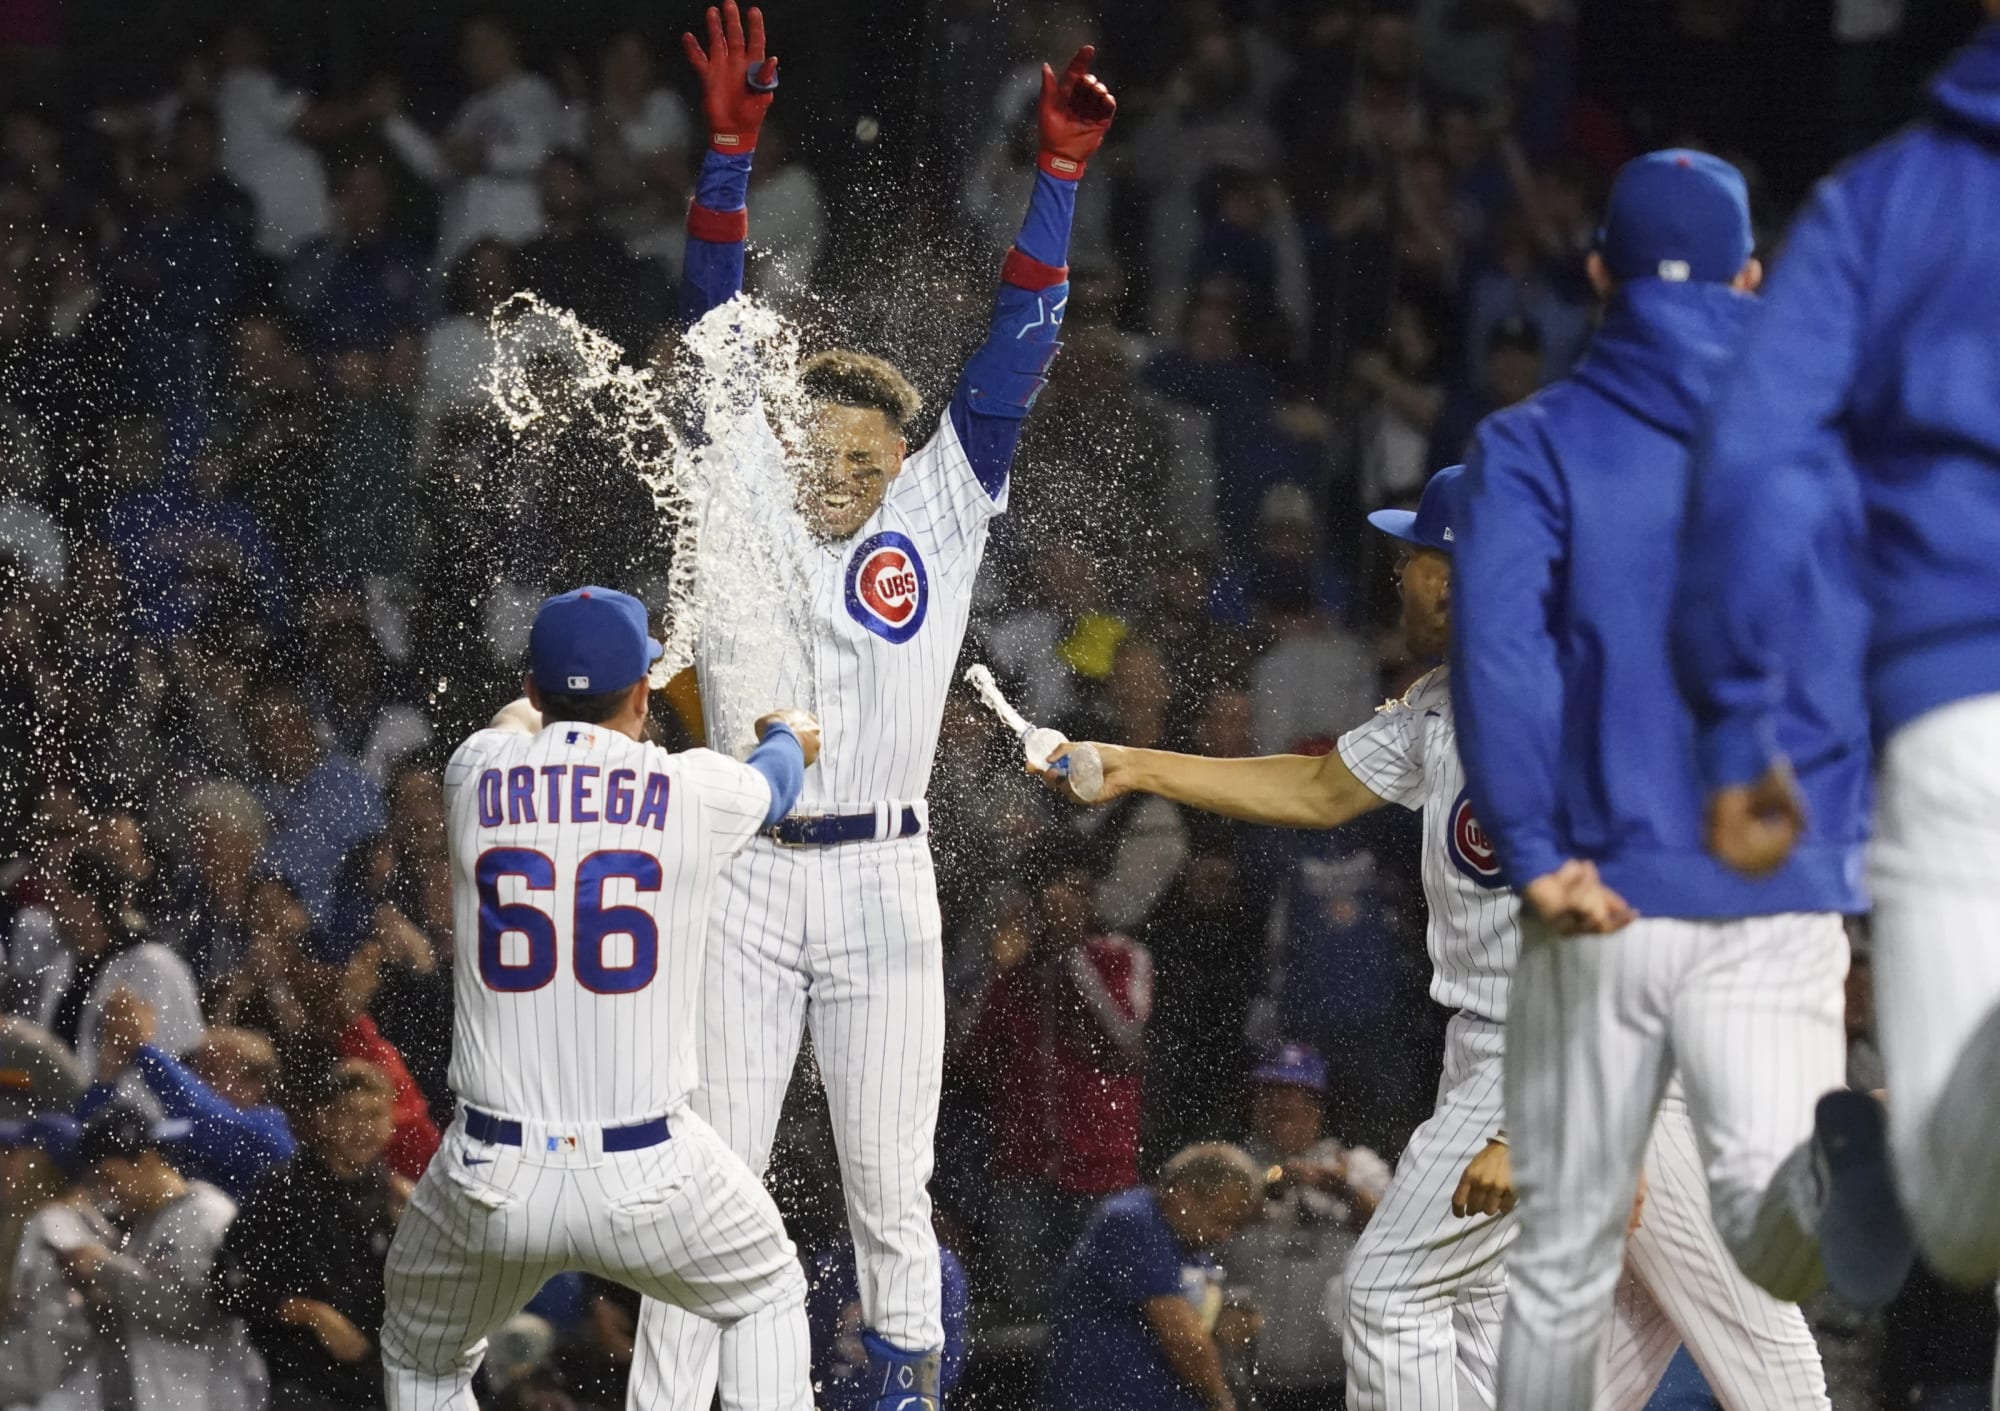 Christopher Morel has a few highlights in the Cubs' win vs Reds